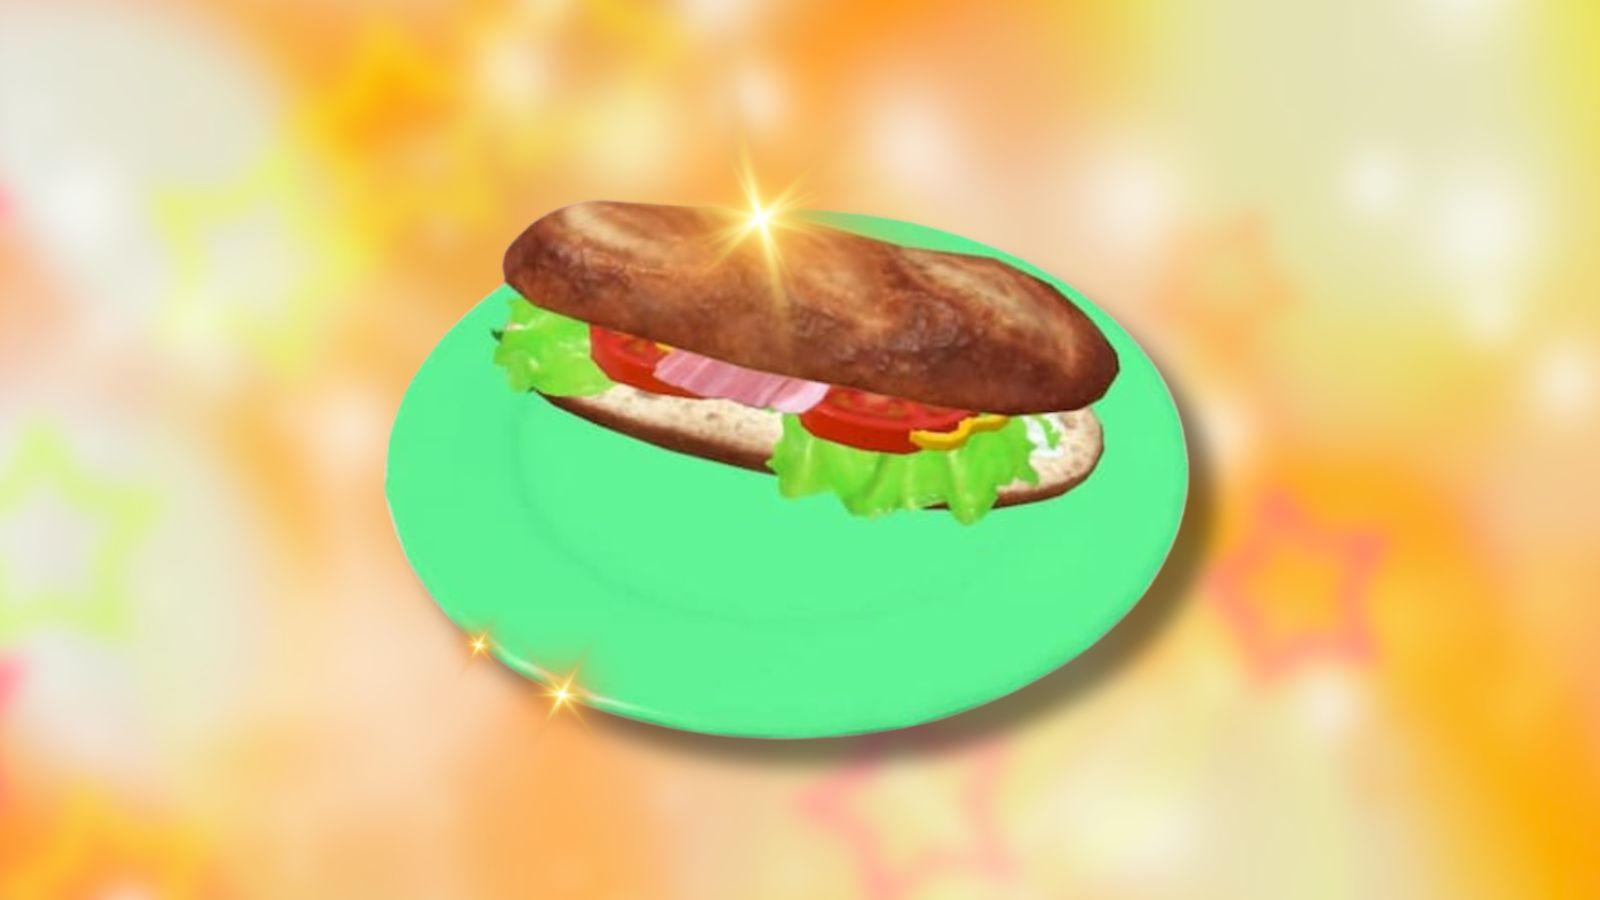 Pokemon Scarlet & Violet sandwich with sparkles and stars in background.